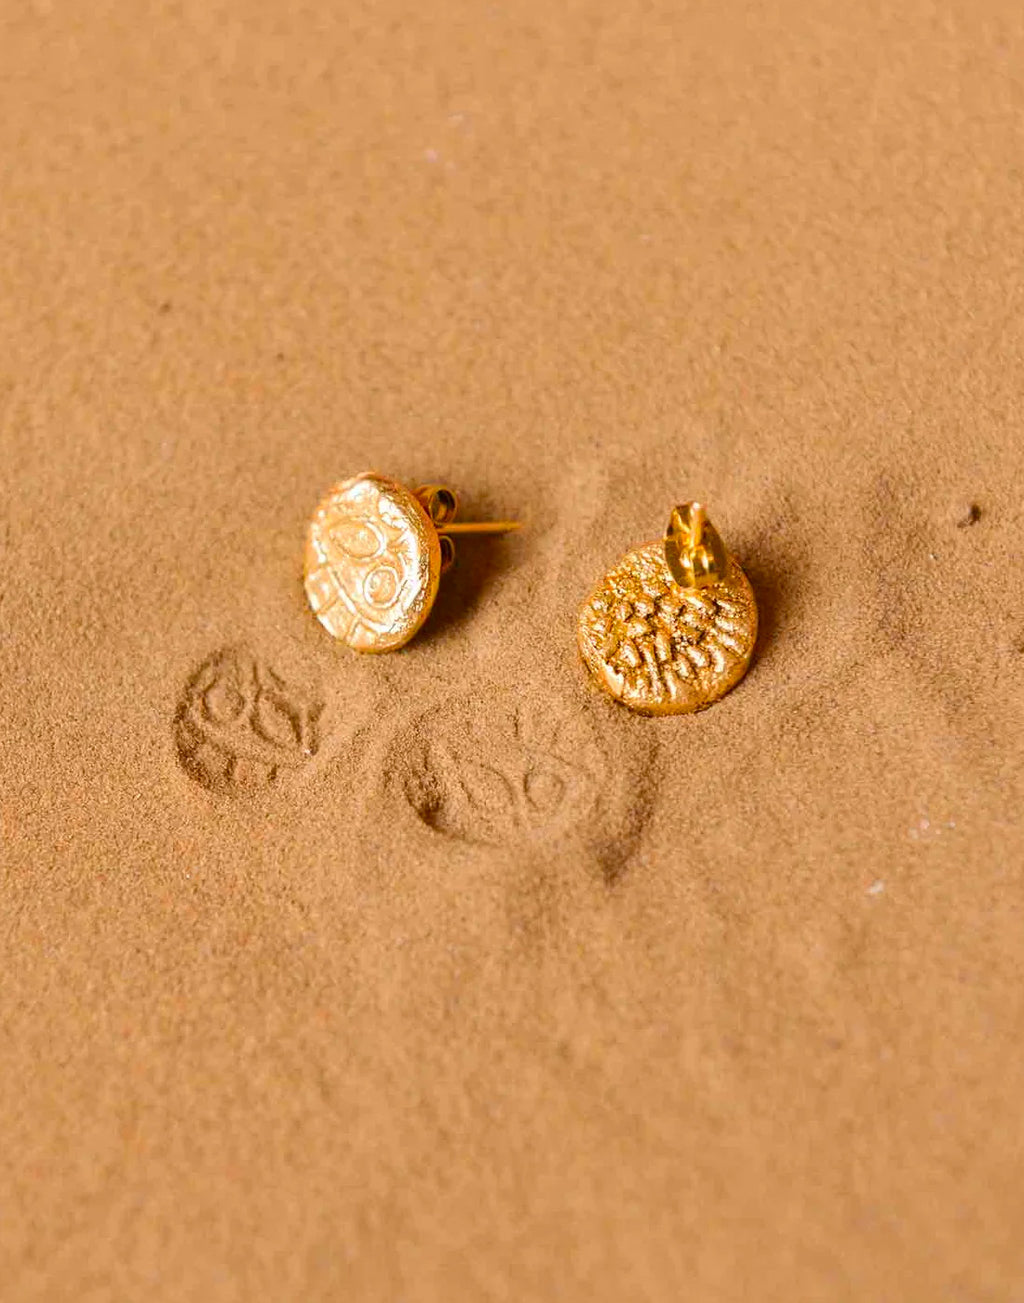 Fossil Studs 1 - Statement Earrings - Gold-Plated & Hypoallergenic Jewellery - Made in India - Dubai Jewellery - Dori